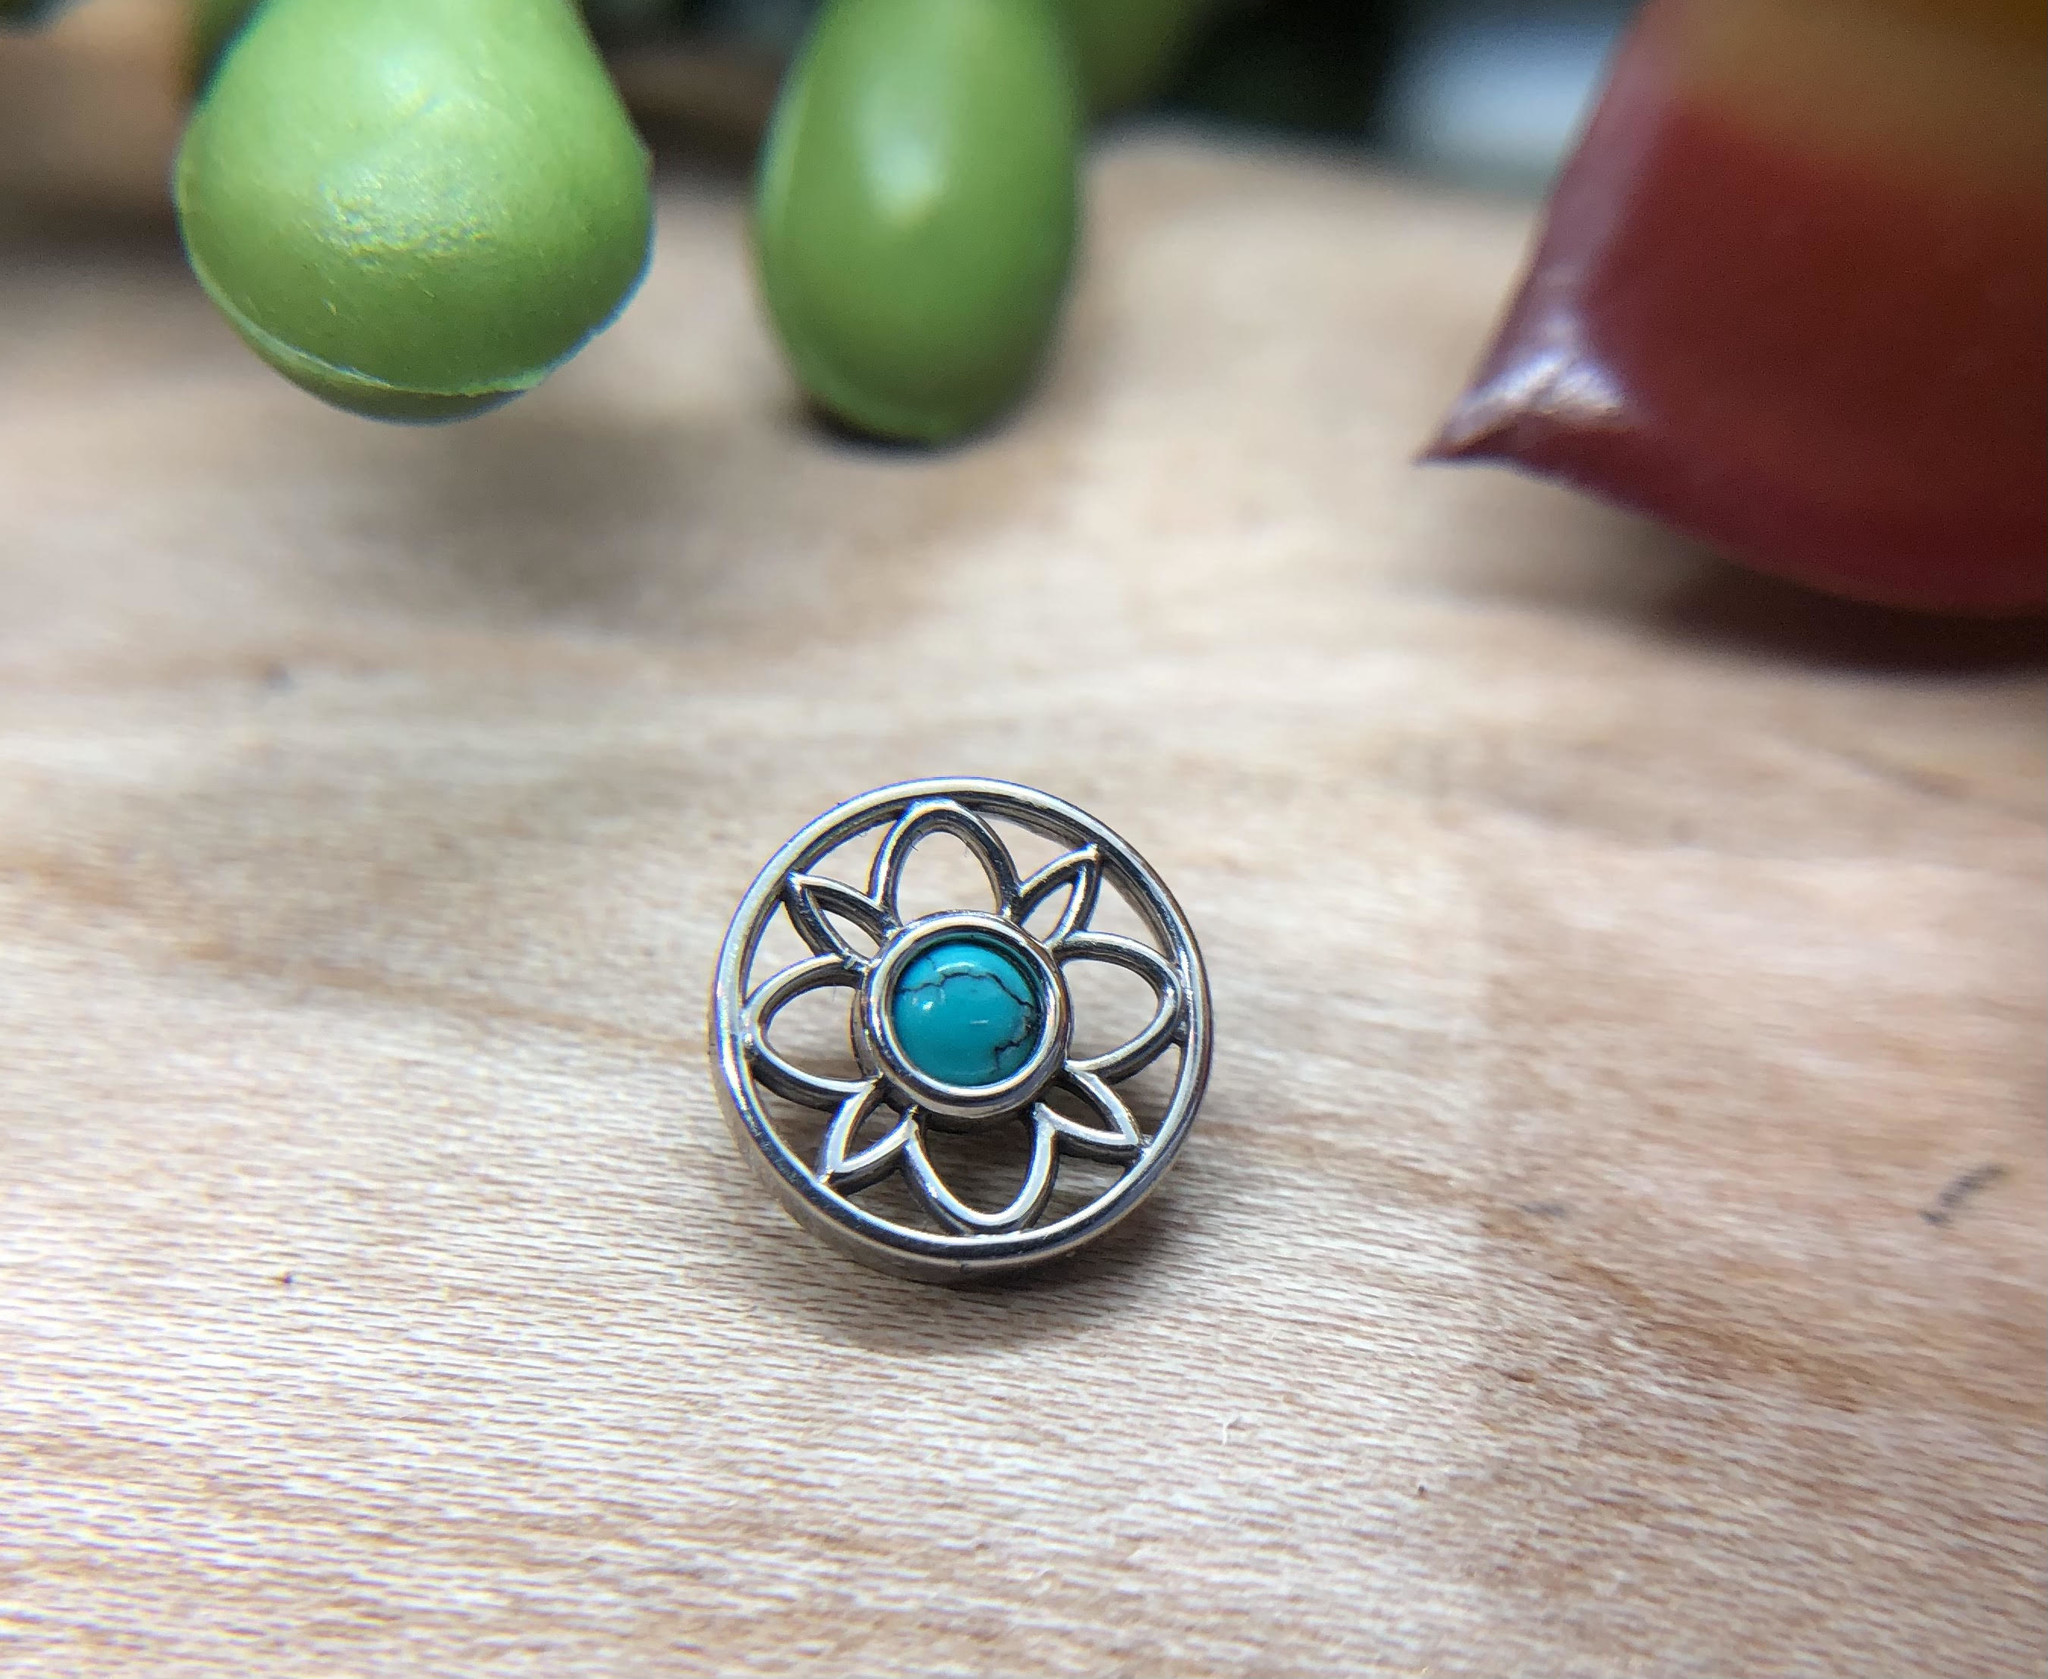 18/16g "Paloma Flower" with Turquoise by BVLA